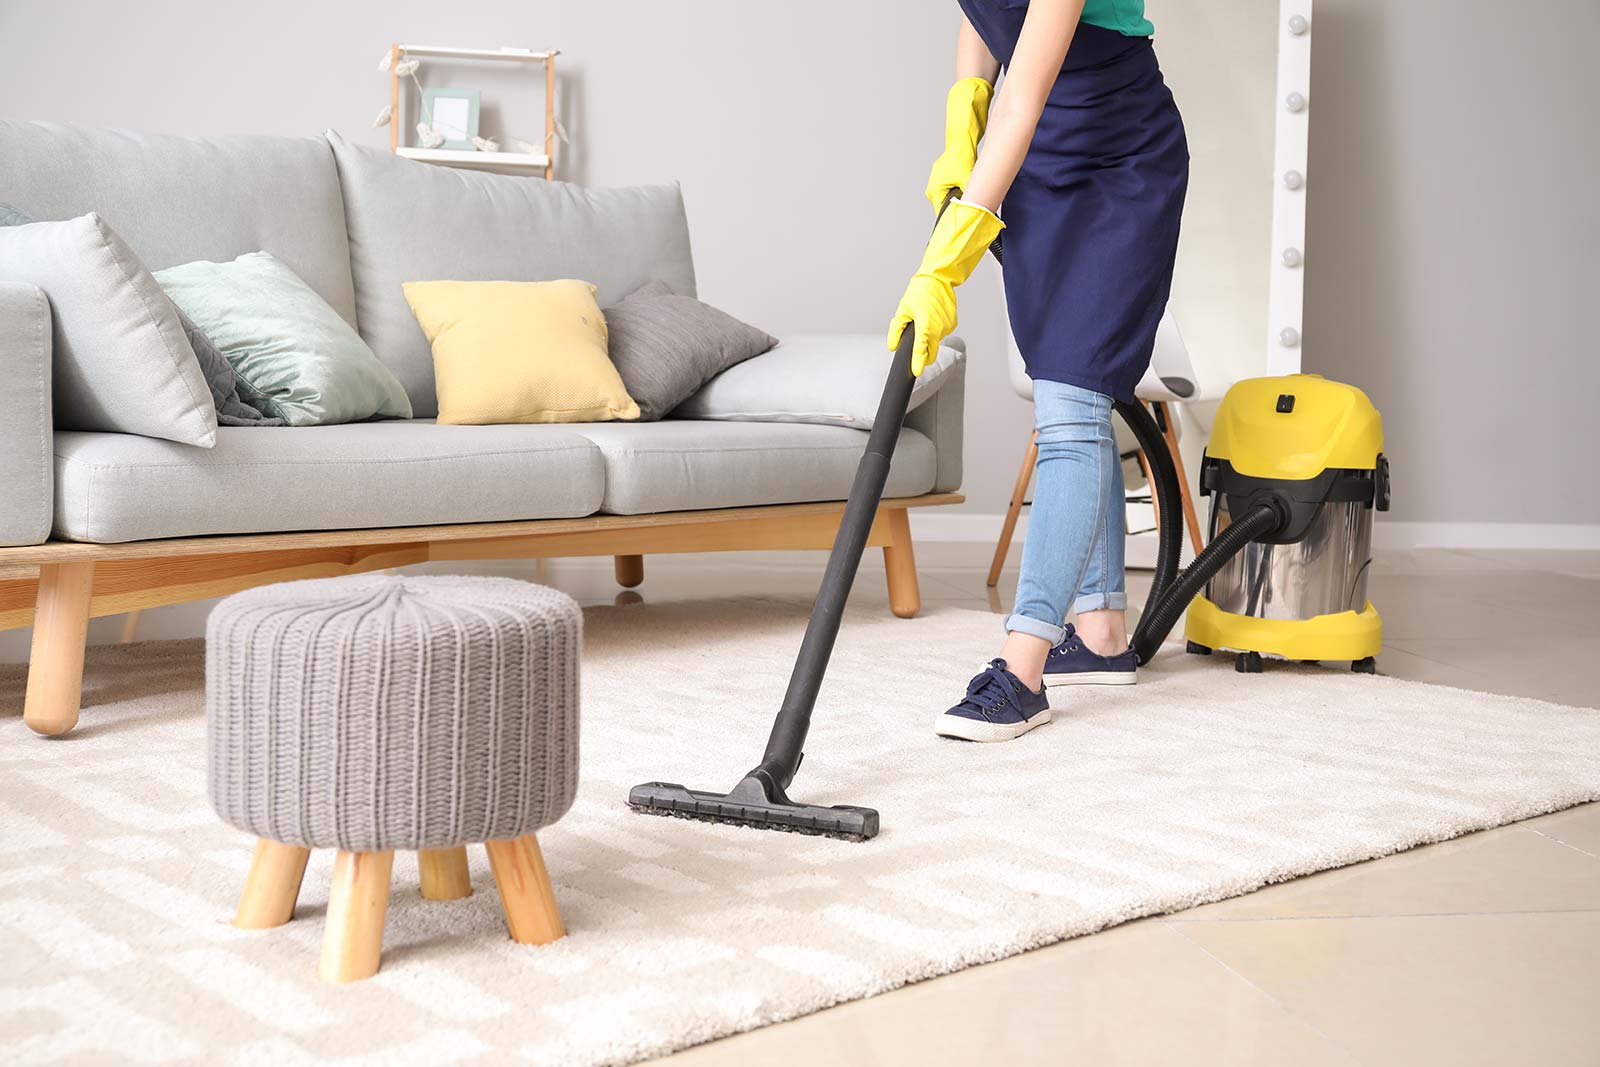 Top 45 house cleaning websites to inspire you in 2023 | Freshy